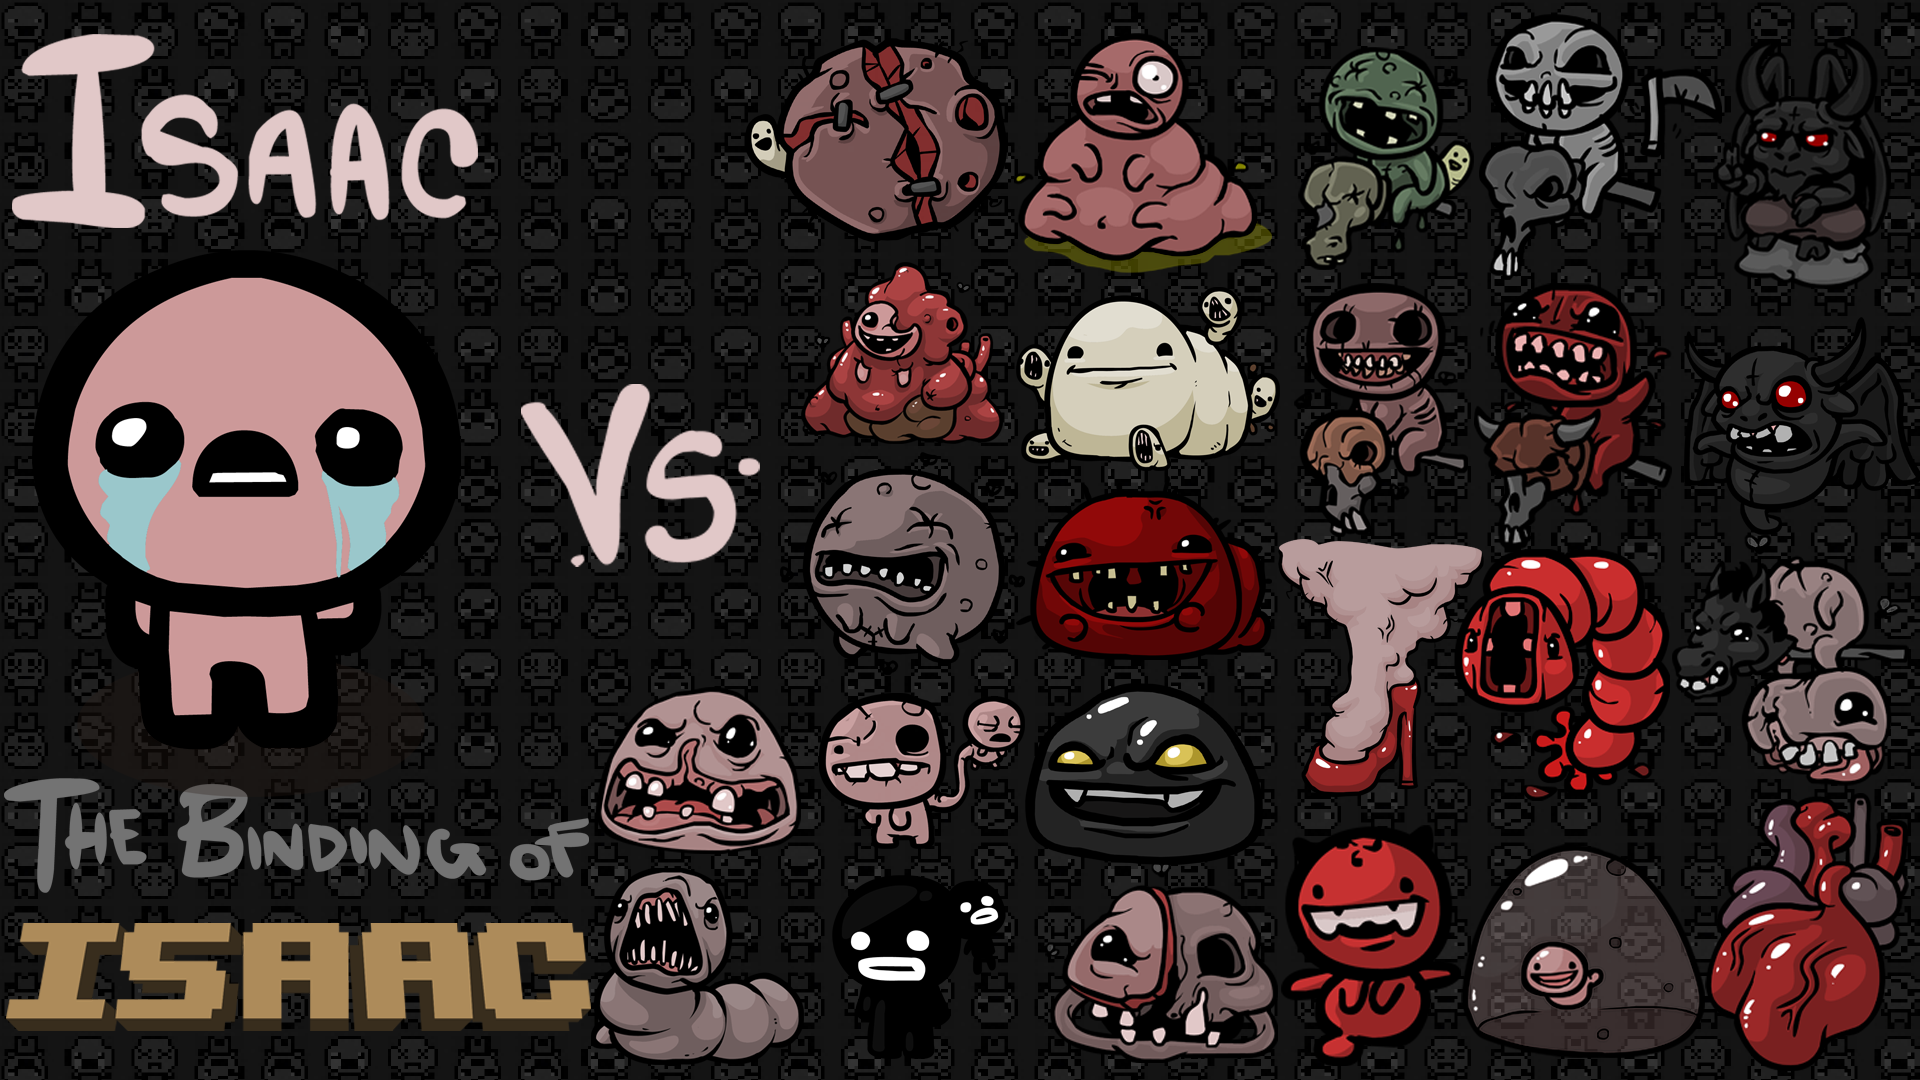 isaac the game download